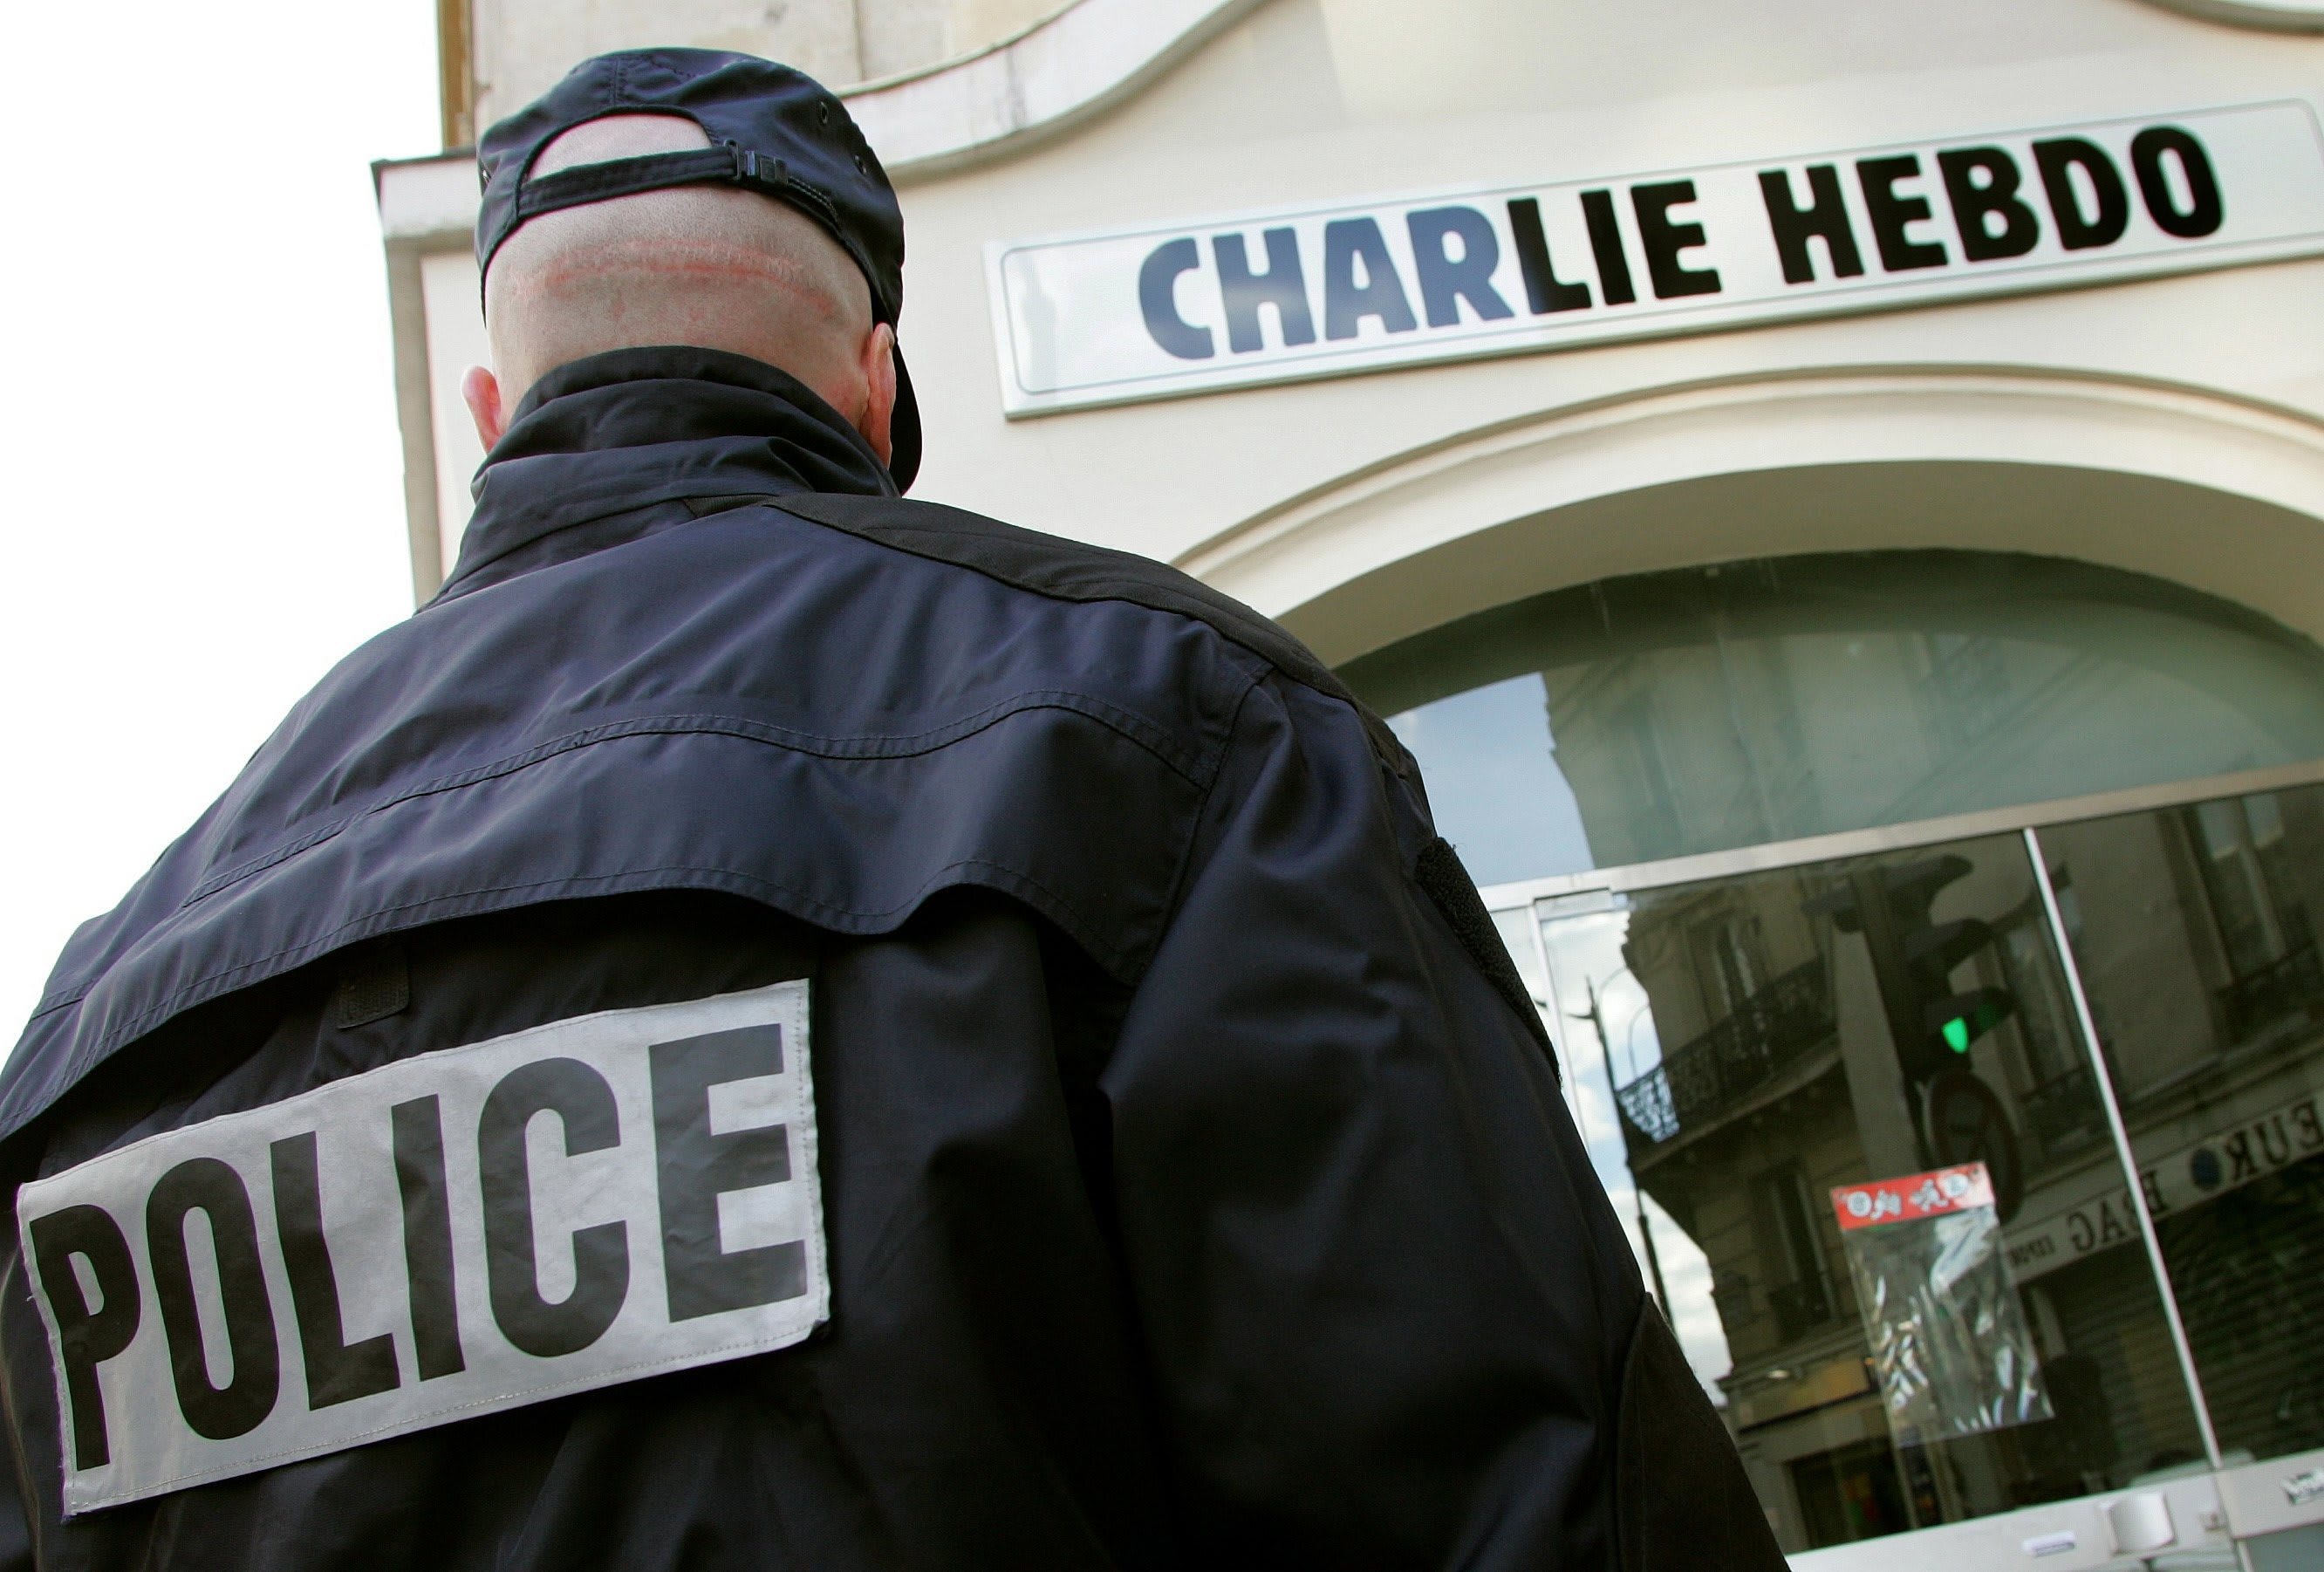 At least 10 people were killed in Paris in February 2006 after the satirical newspaper Charlie Hebdo published offensive cartoons depicting the Prophet Muhammad.